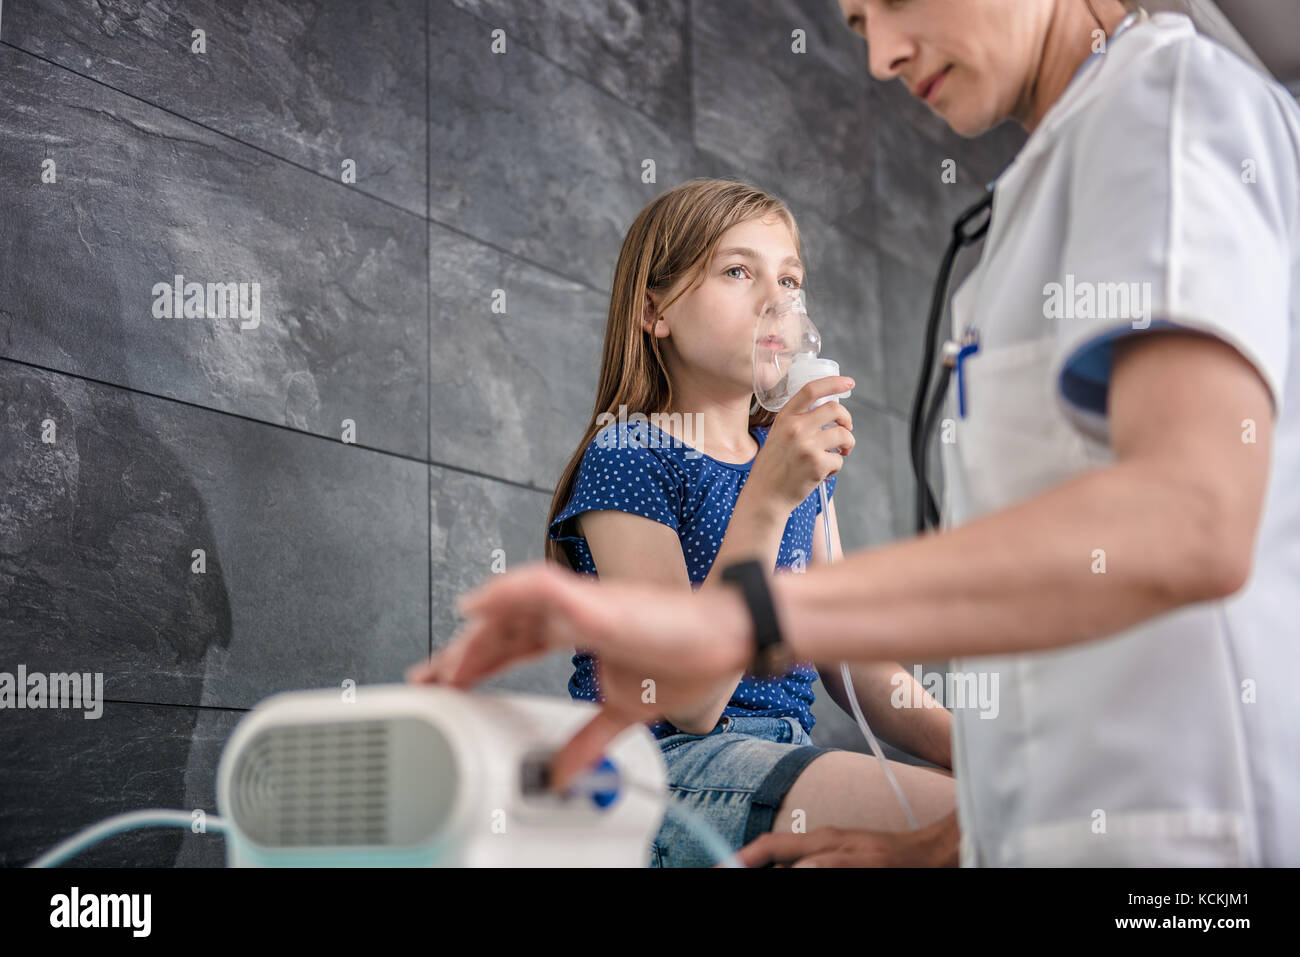 Little girl having a medical inhalation treatment with a nebulizer at the hospital Stock Photo